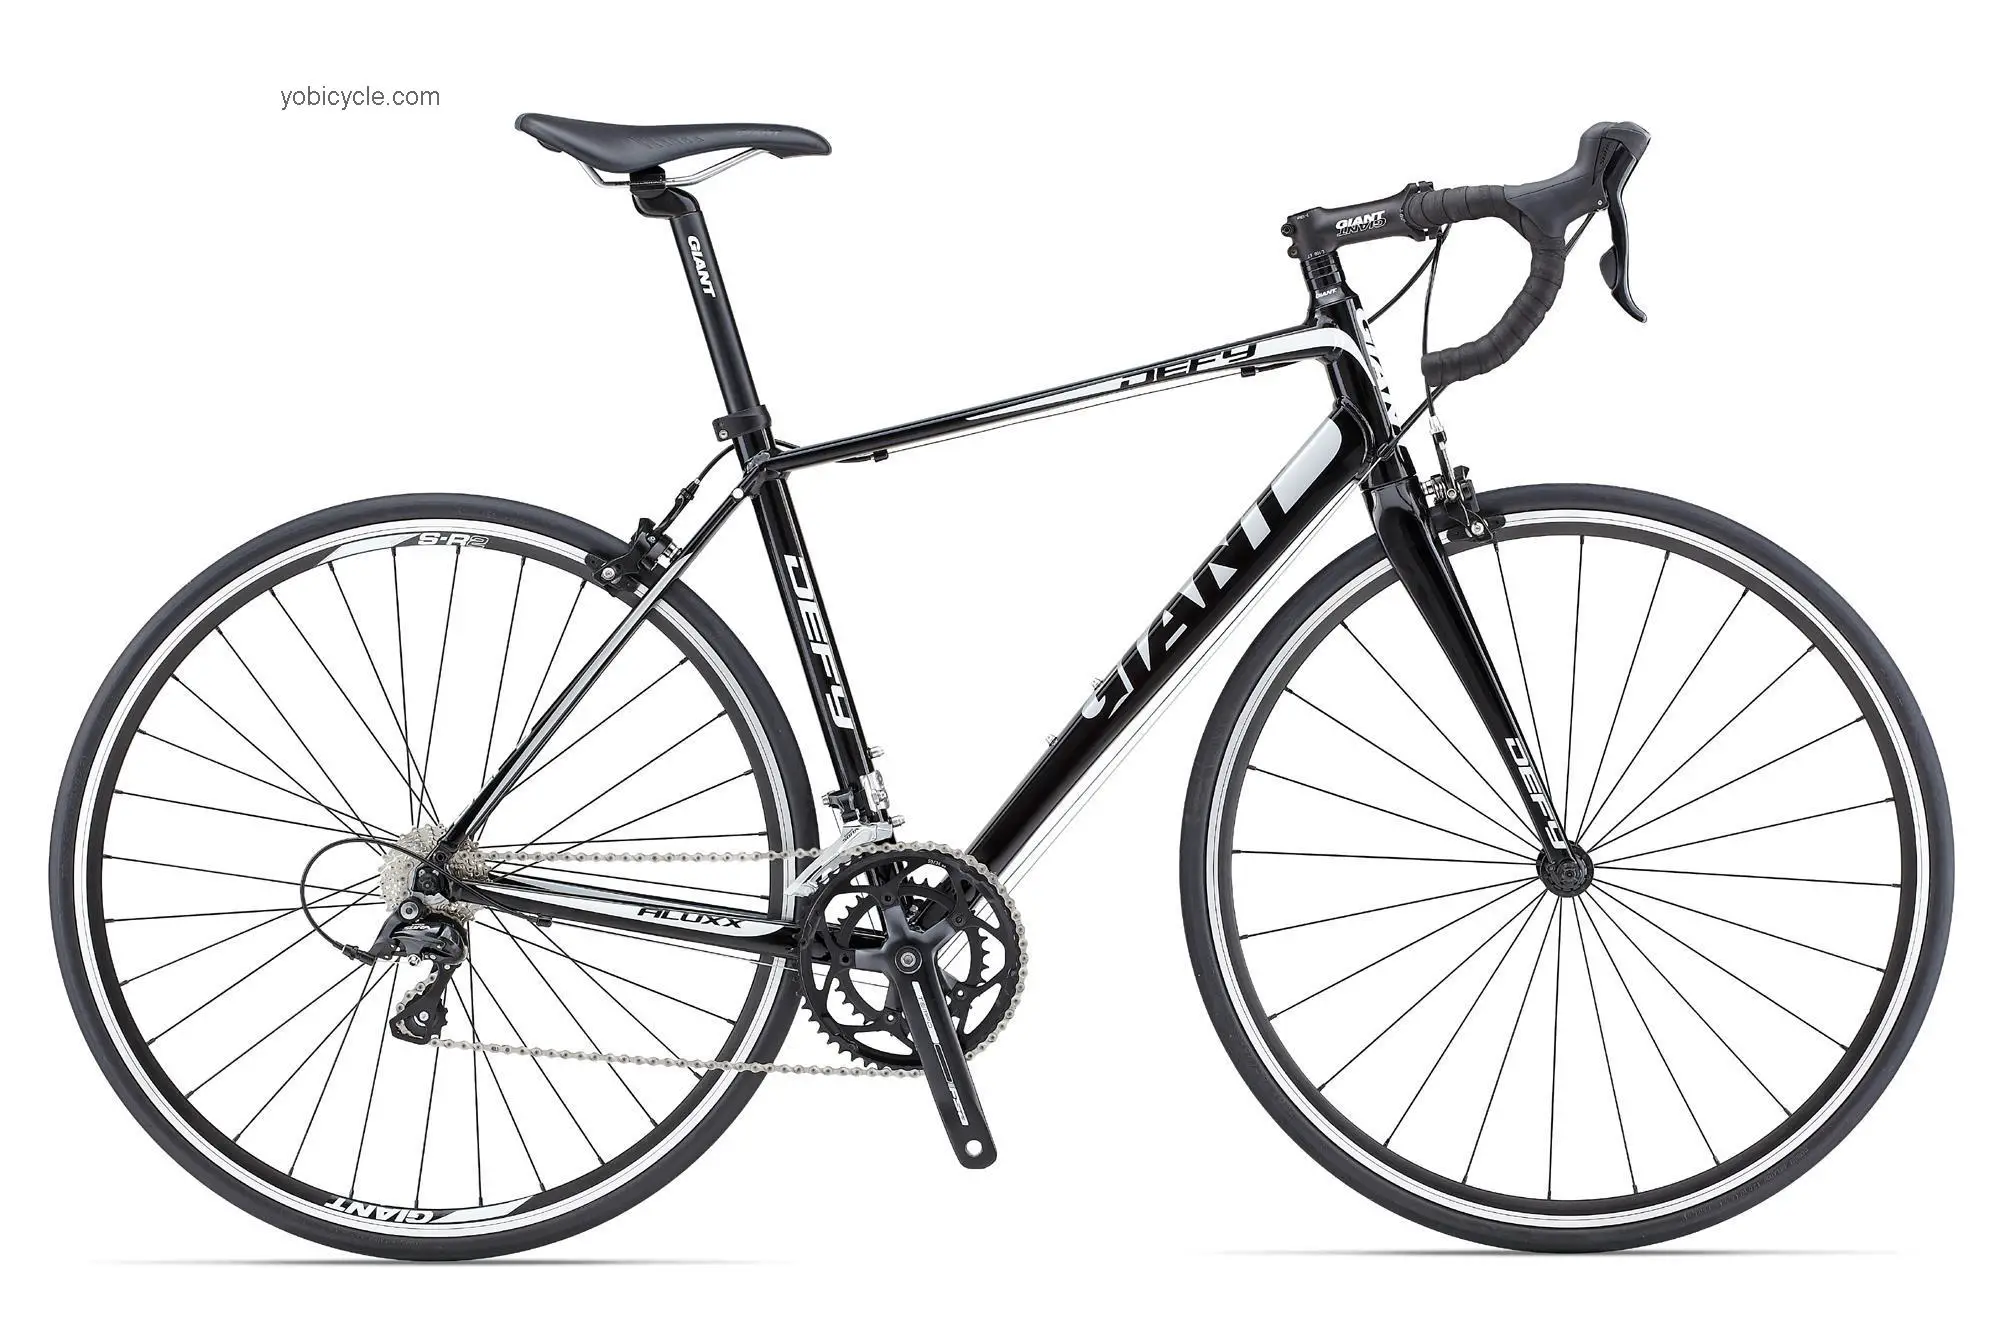 Giant Defy 3 2013 comparison online with competitors